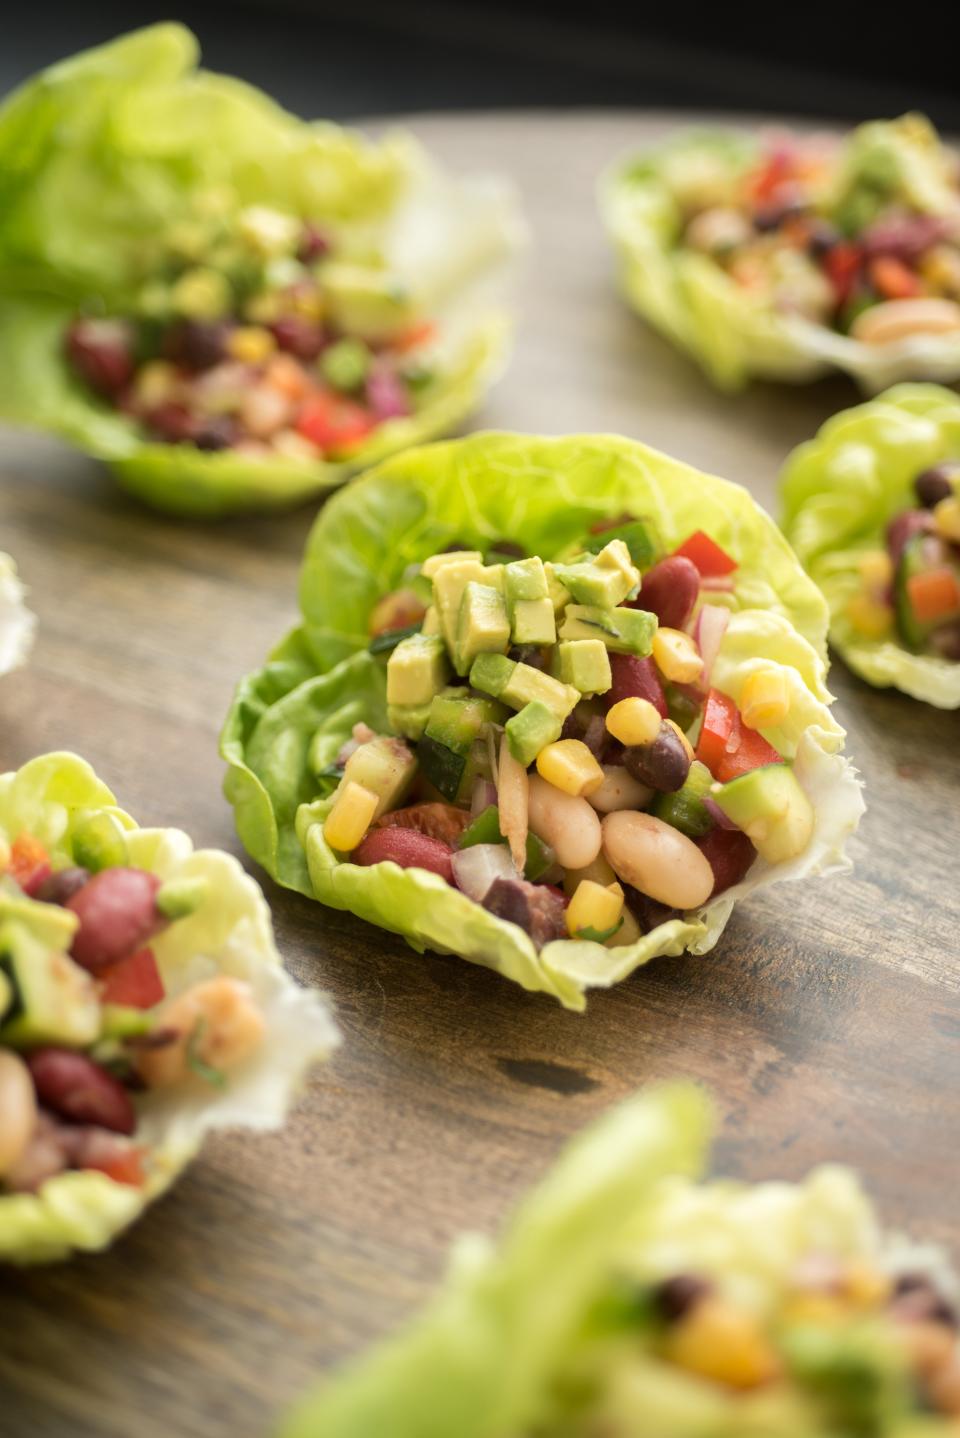 Tex-Mex Bean Salad calls for three varieties of canned beans and a can of corn.